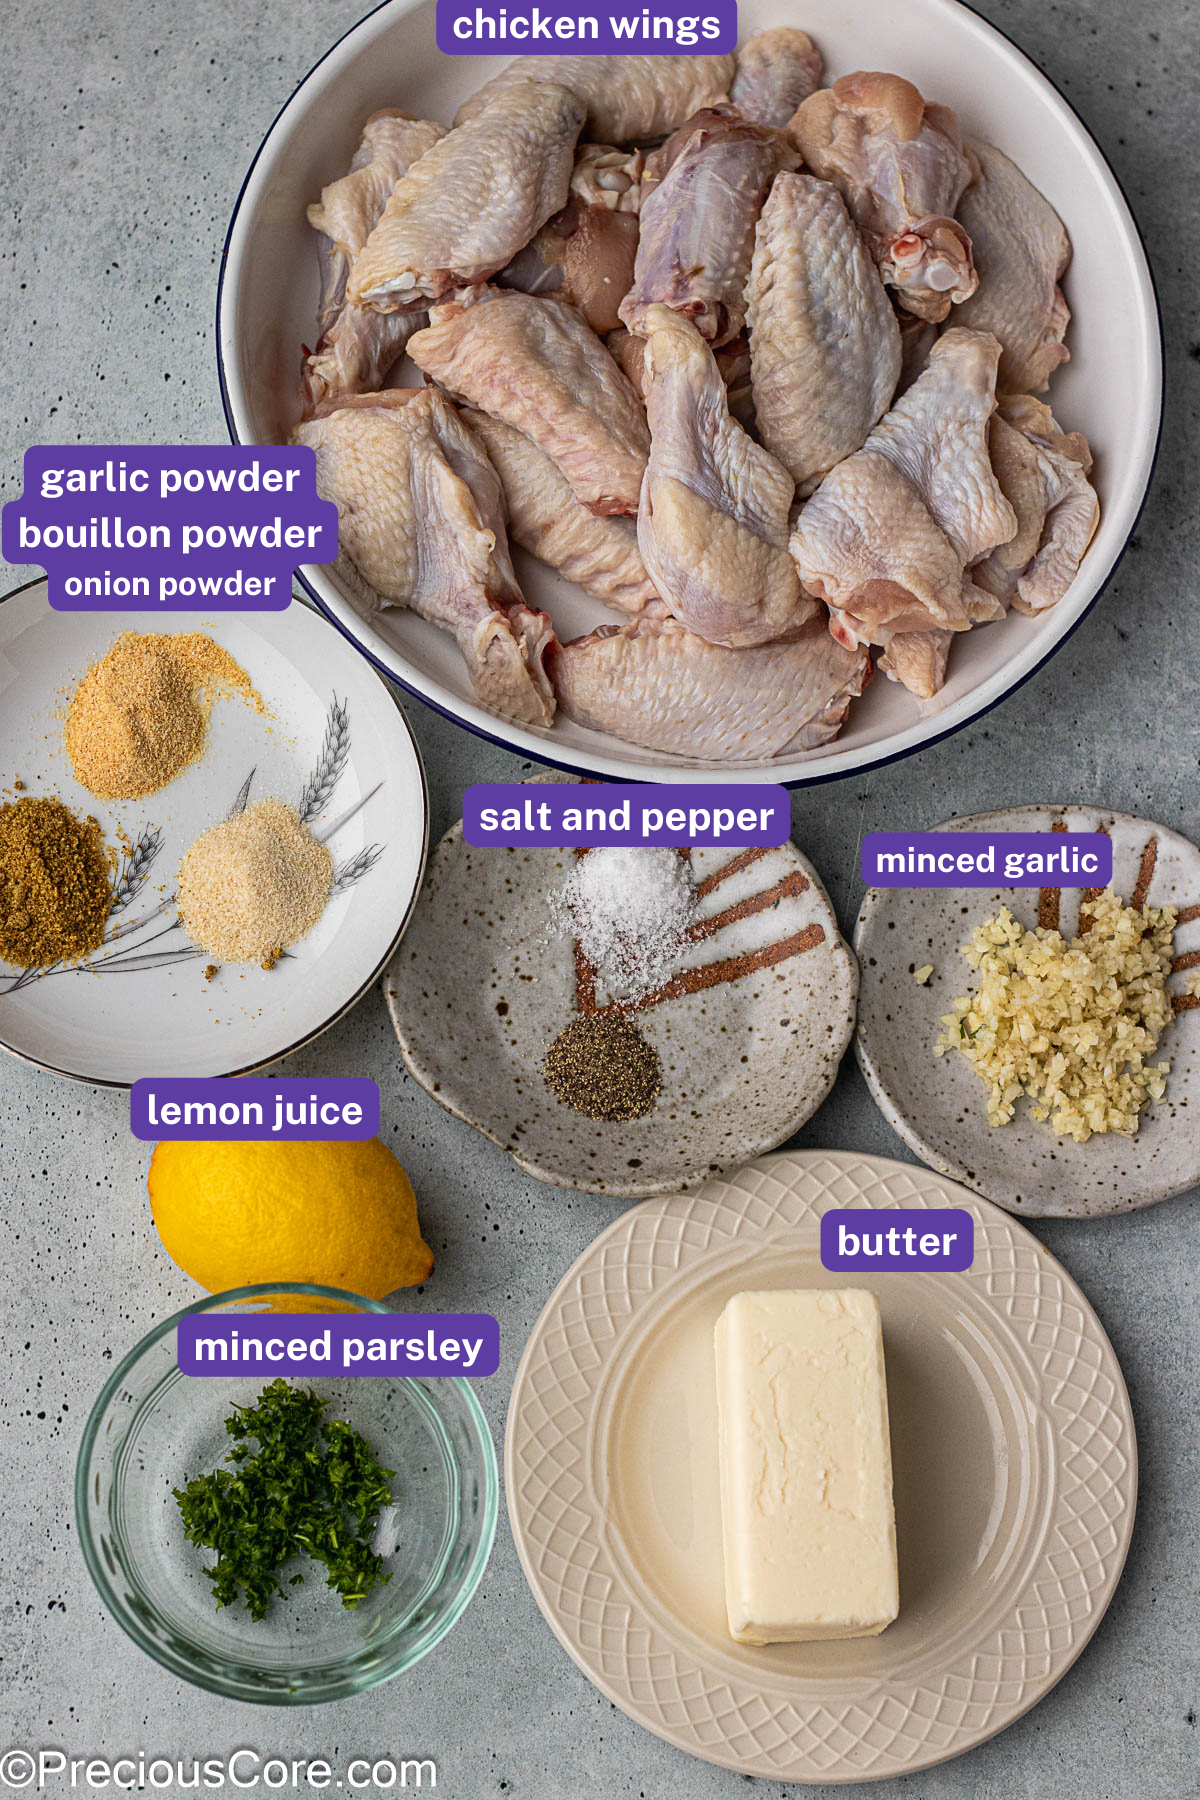 Ingredients for garlic butter chicken wings with labels to explain each ingredient.